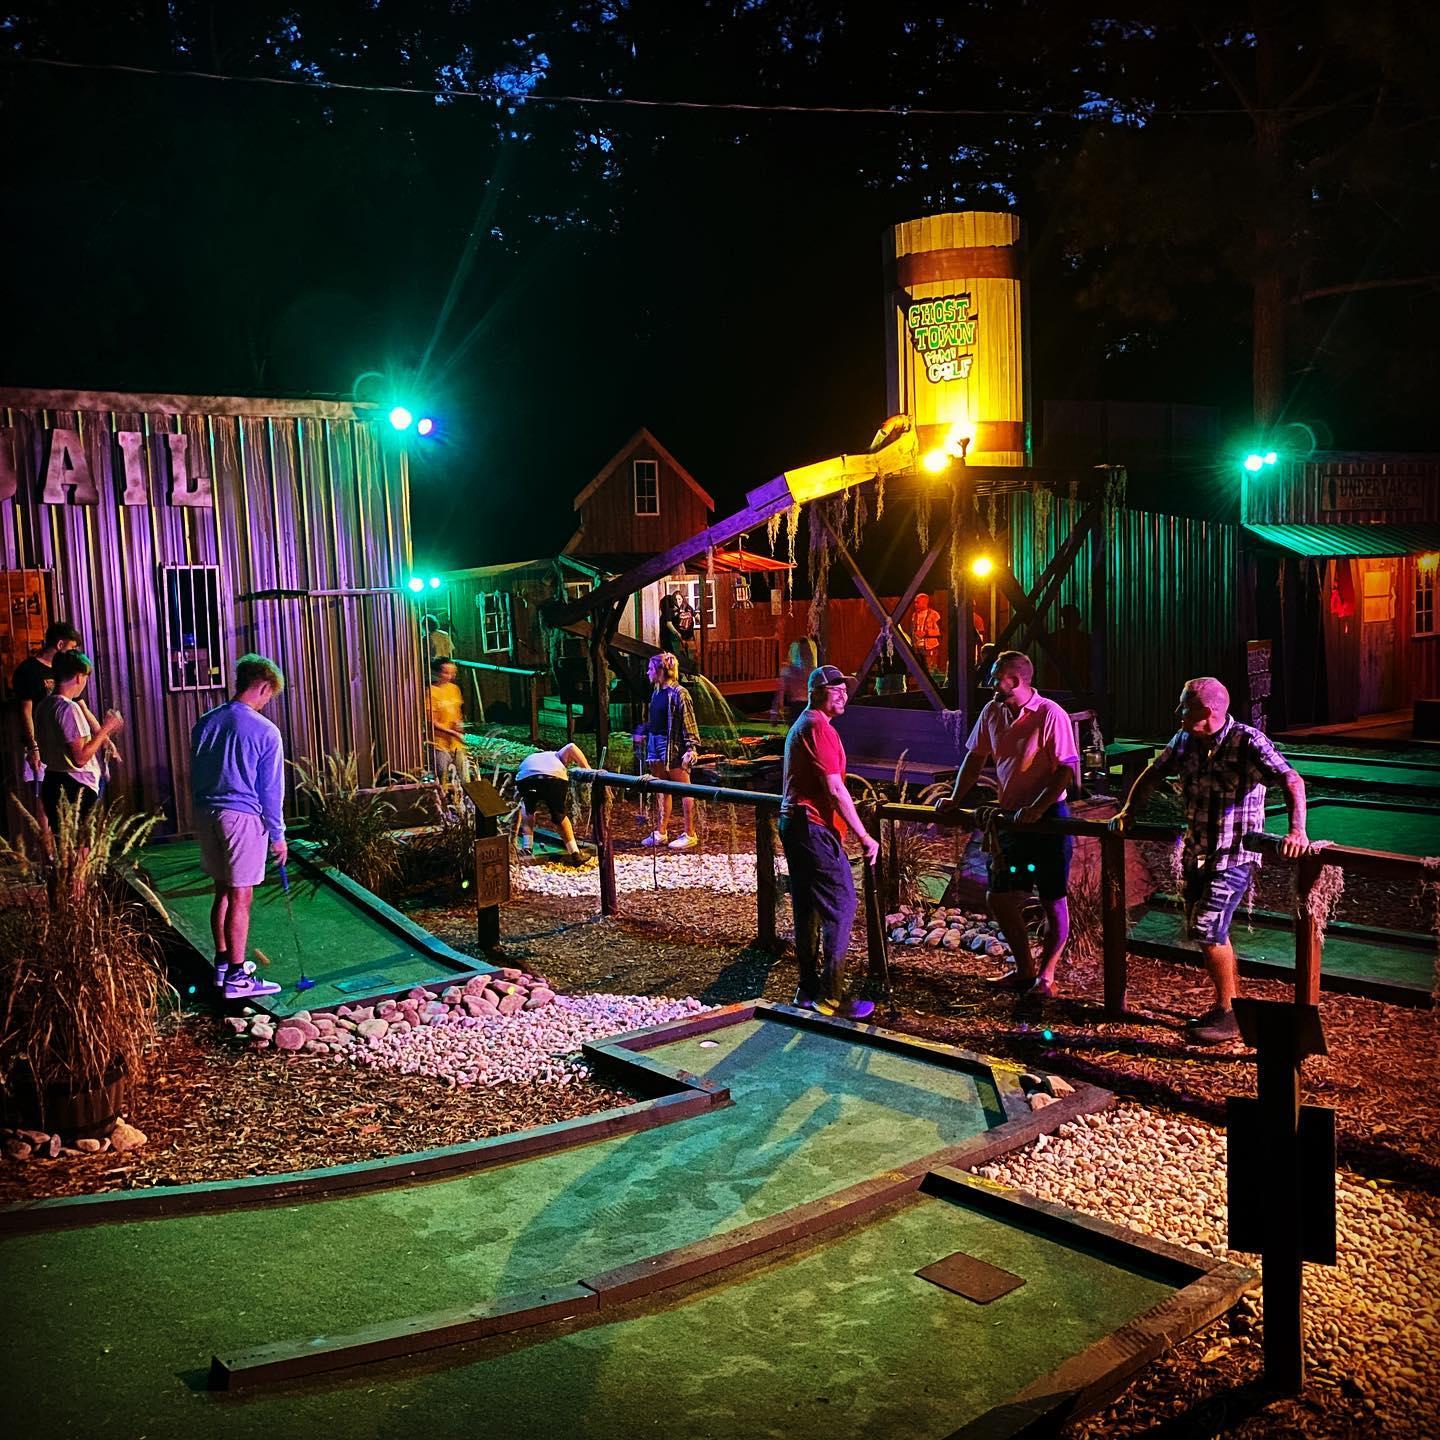 Madworld Haunted Attractions - 2022 Review